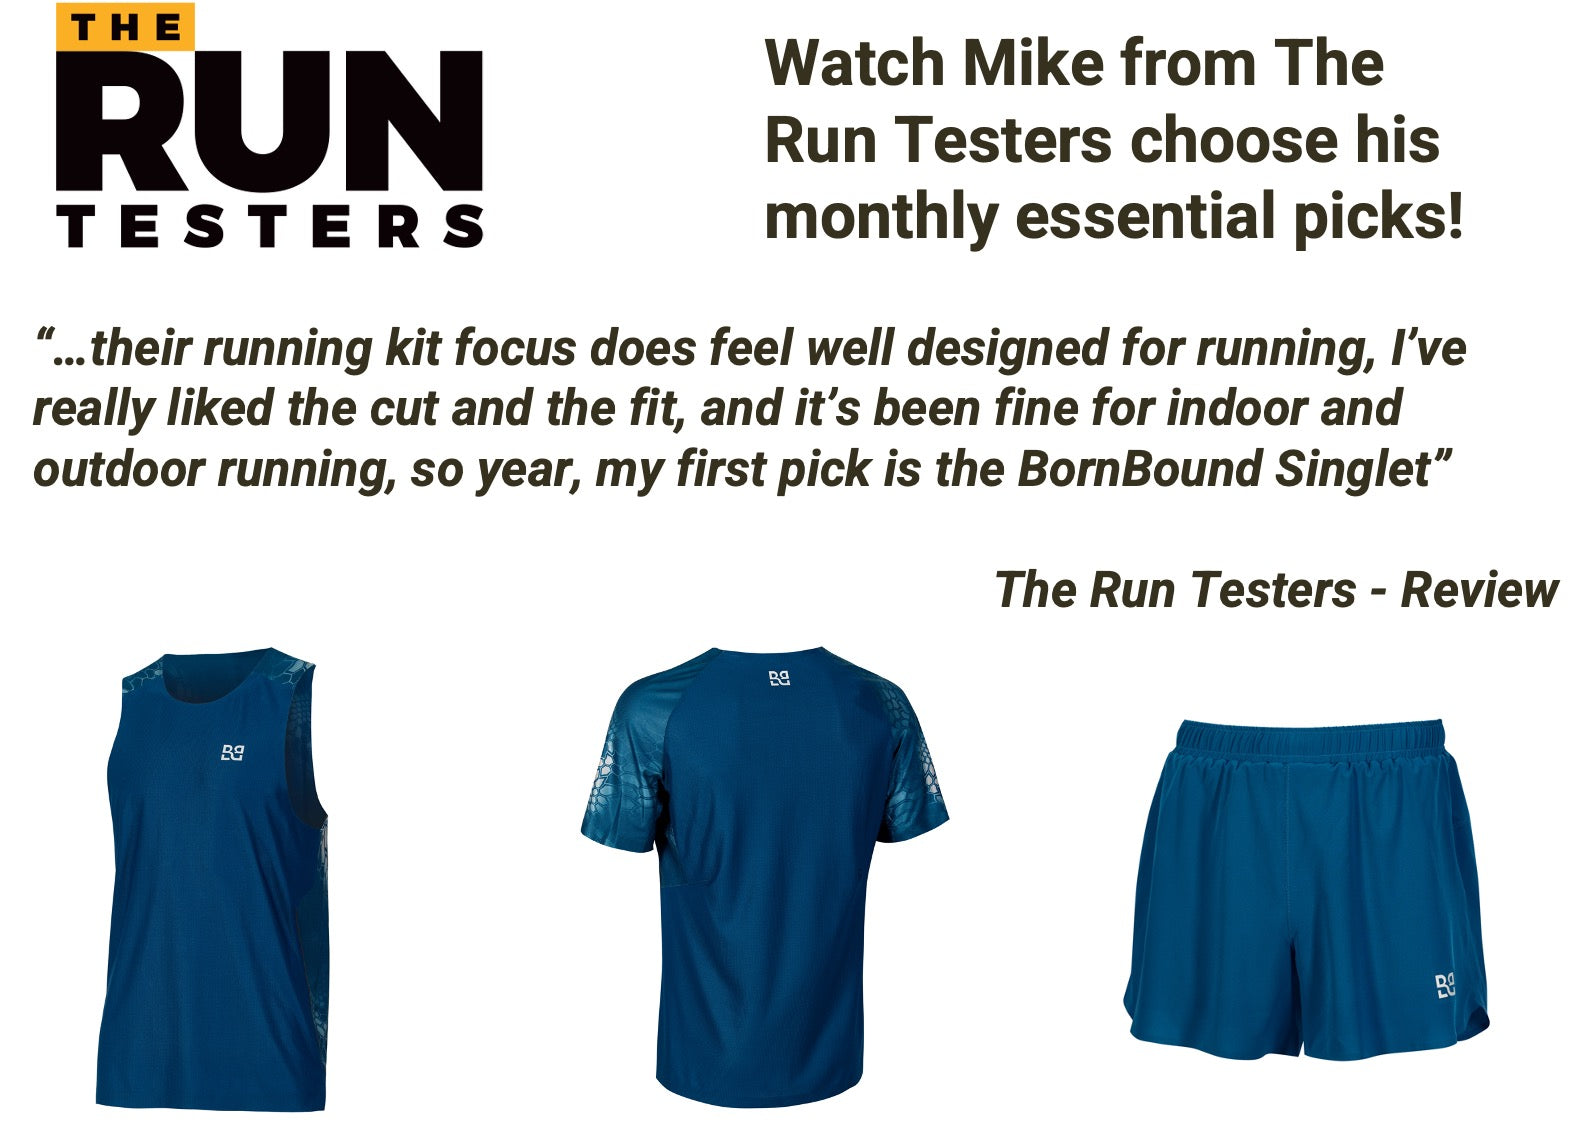 Watch Mike from The Run Testers choose his monthly essential picks!